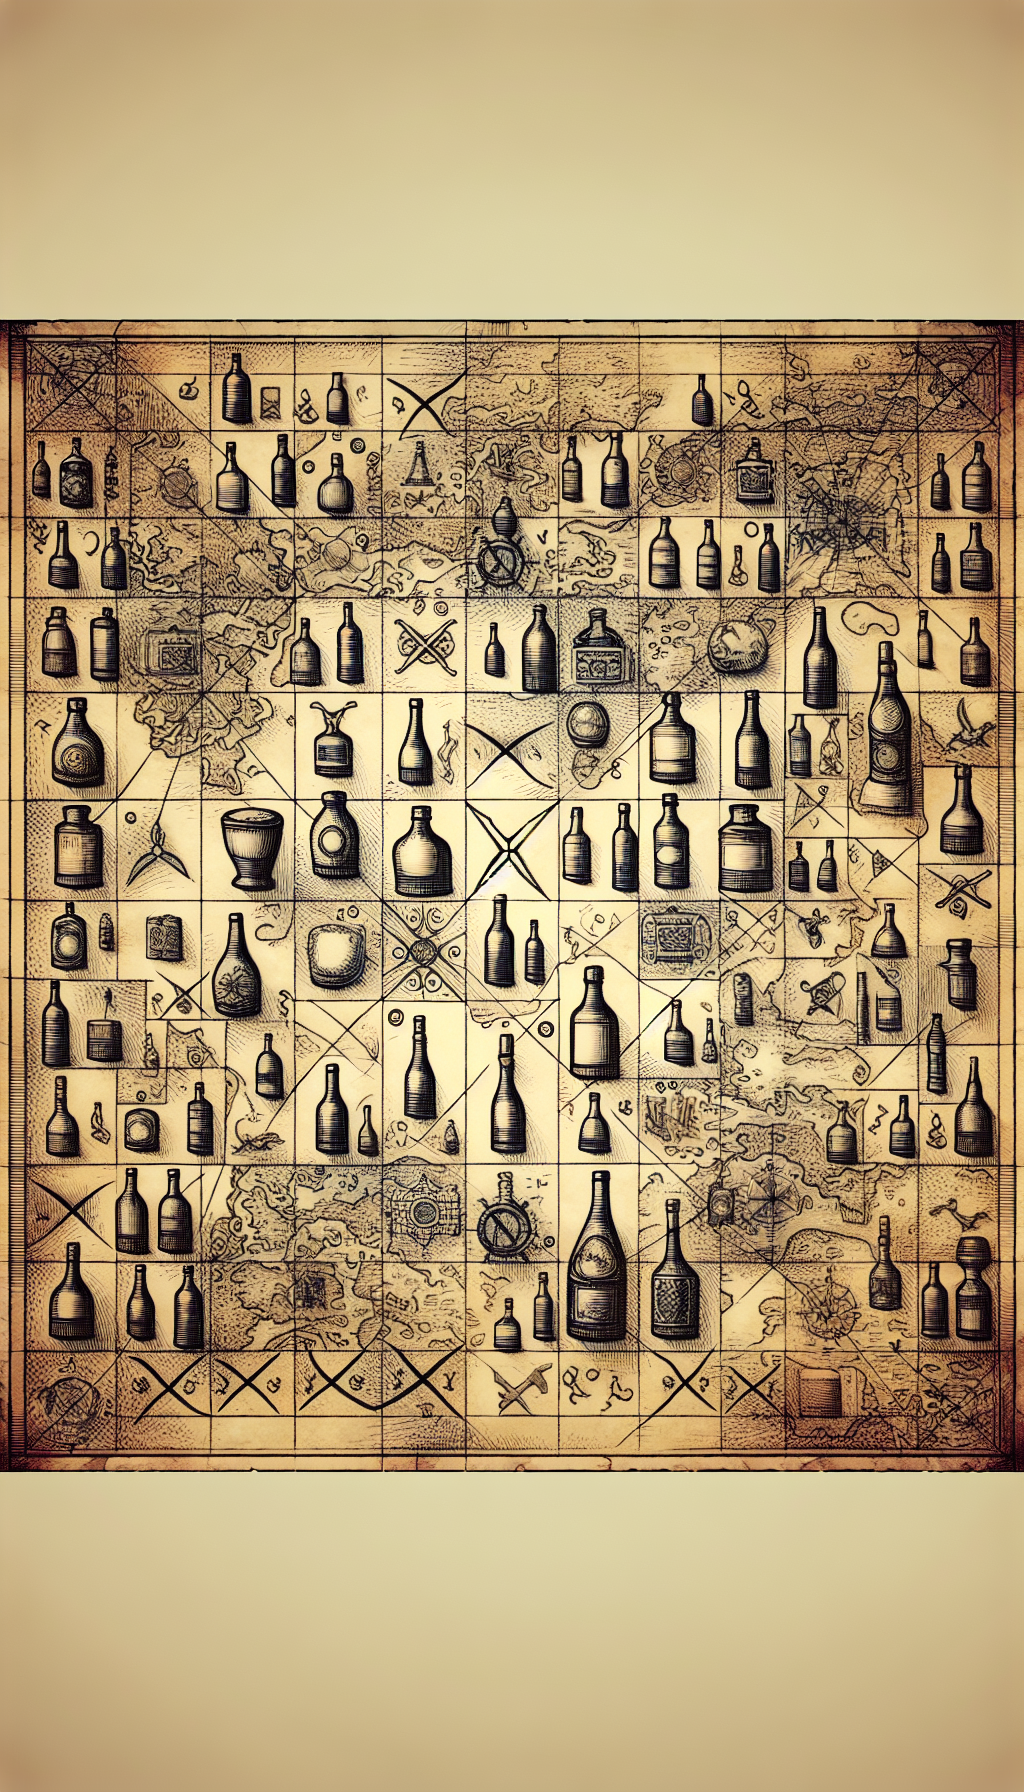 An intricately sketched treasure map unfurls across the canvas, with vintage bottles replacing iconic X-marks. Each bottle is adorned with distinct symbols like rare manufacturer's marks, unique colors, and peculiar shapes—glinting hints of their value. The aged parchment's texture varies stylistically from watercolor softness to sharp ink lines, illustrating the diverse aspects that contribute to an old bottle's worth.